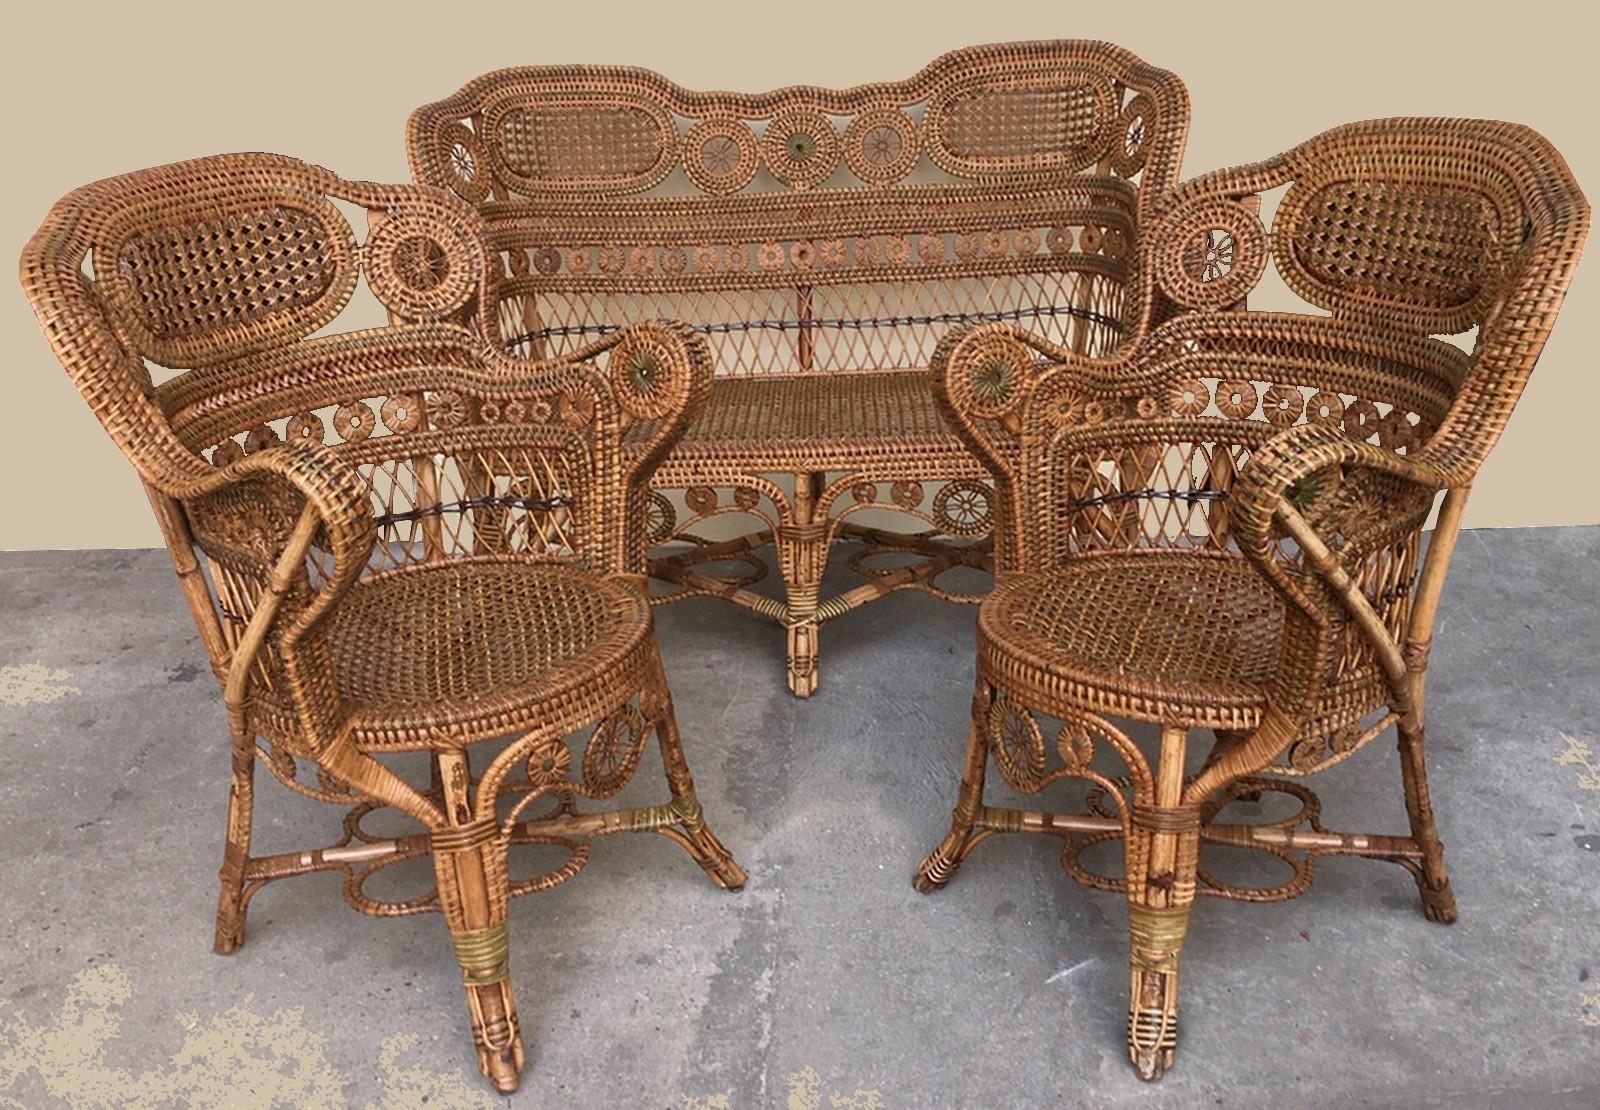 French winter garden furniture set, work of the Maison Perret Vibert, including two armchairs, four chairs, a table and a sofa, second half of the 19th century.
In polychrome tinted rattan, each piece with a sheet metal plate inscribed 